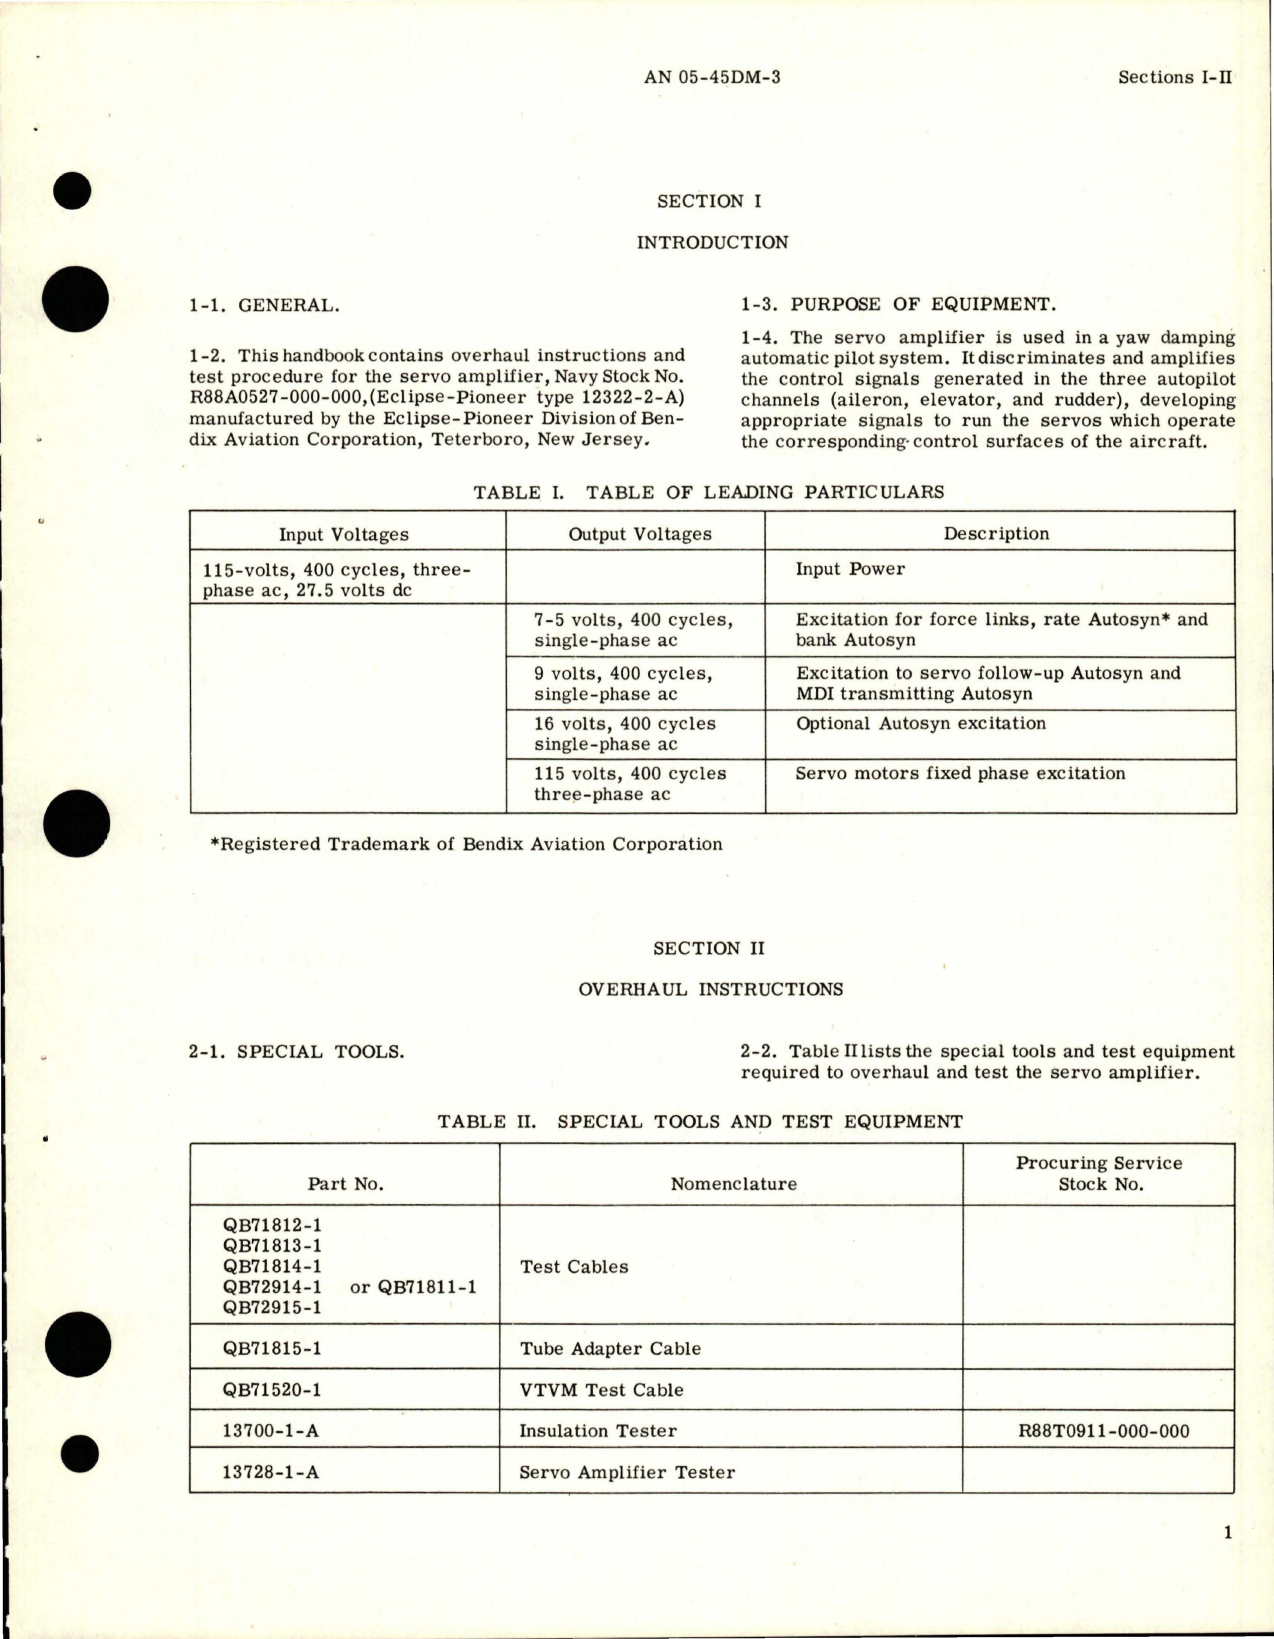 Sample page 5 from AirCorps Library document: Overhaul Instructions for Servo Amplifier - Part 12322-2-A